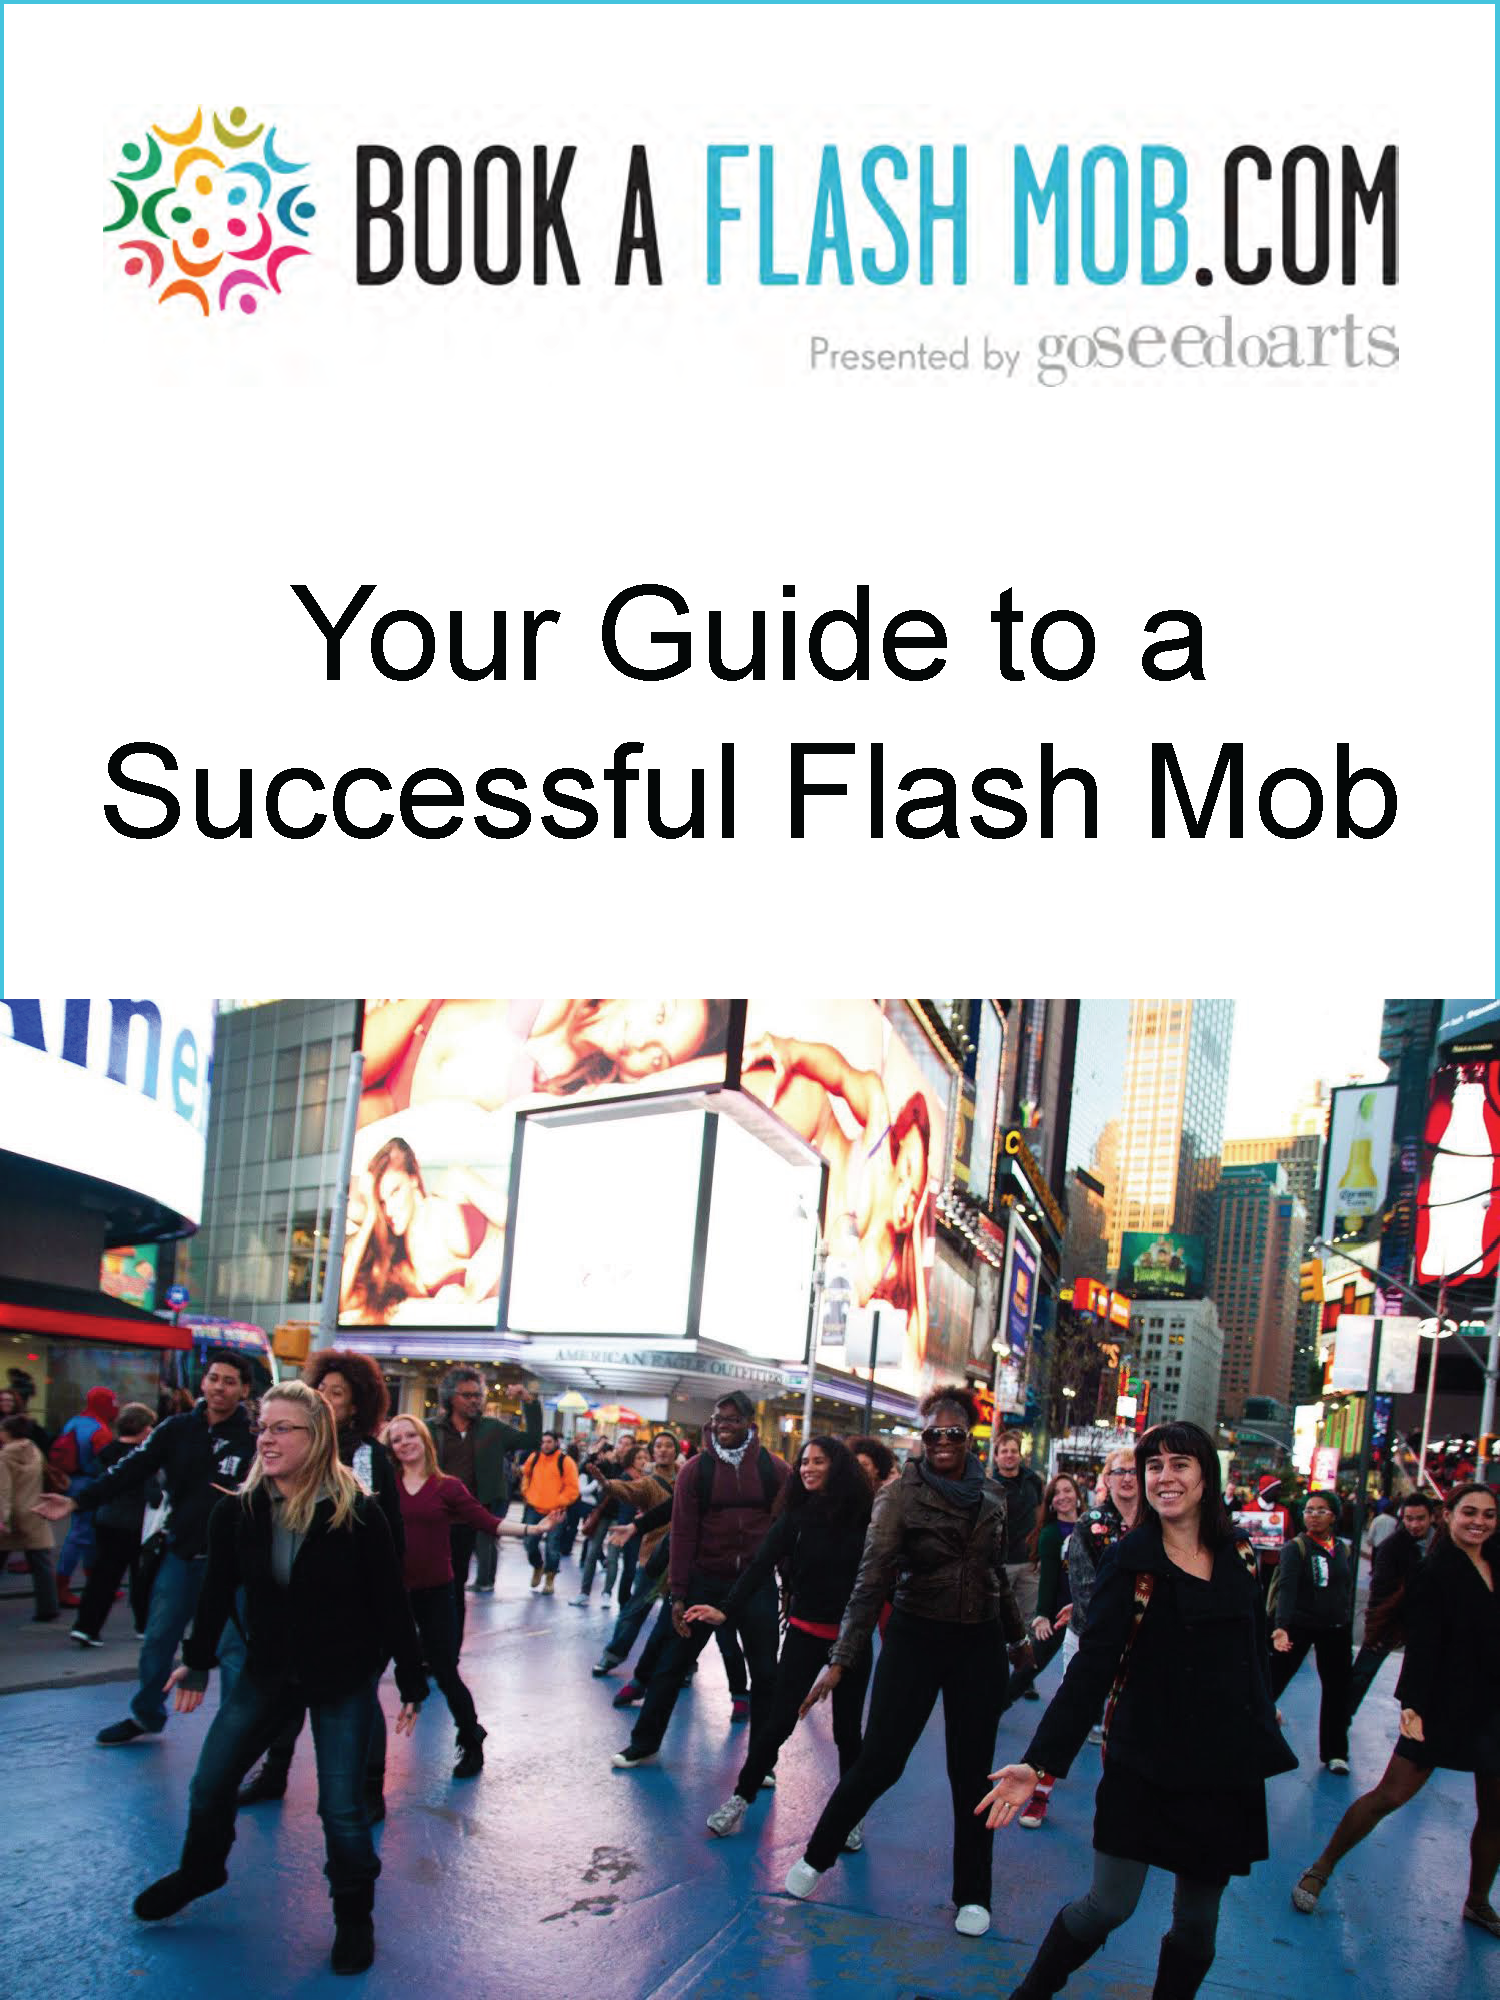 Download Ebook - Guide to a Successful Flash Mob